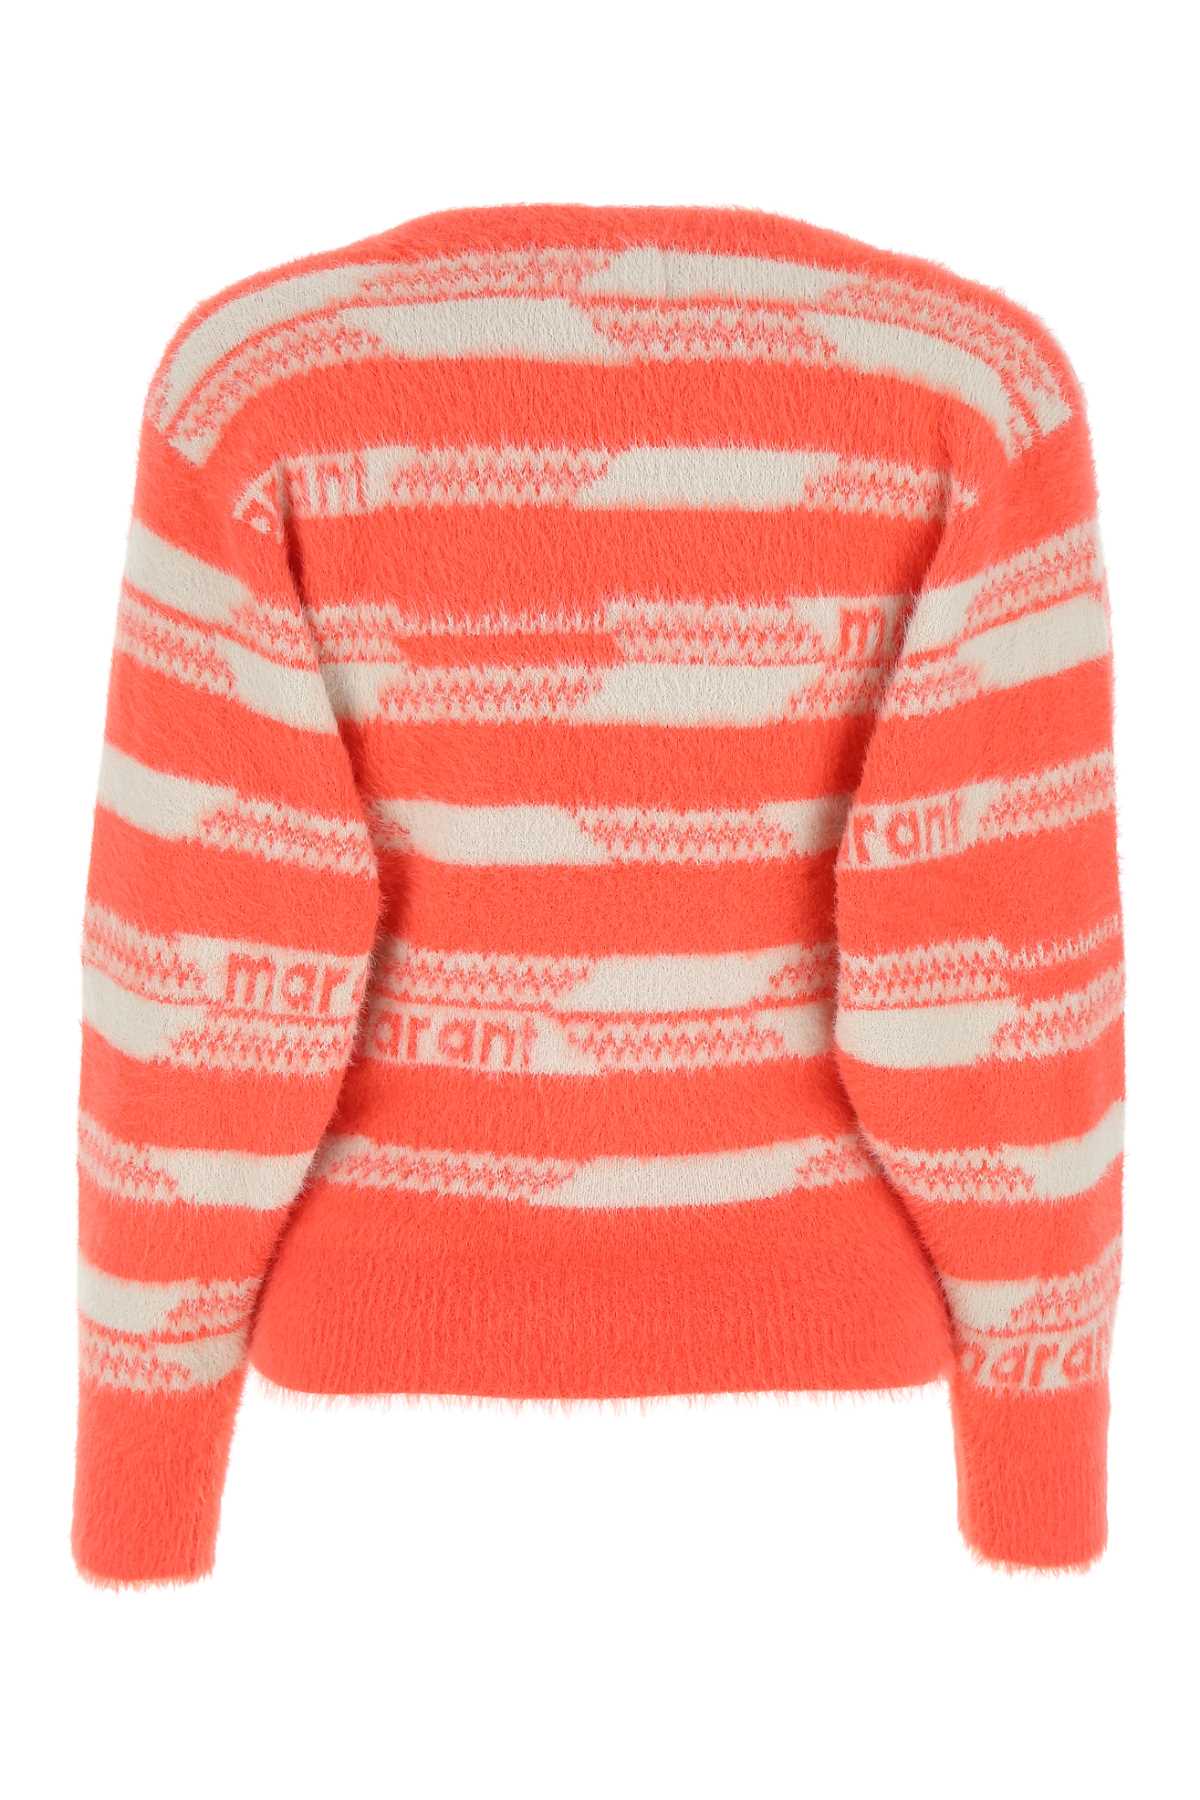 Marant Etoile Embroidered Nylon Orson Sweater In Red